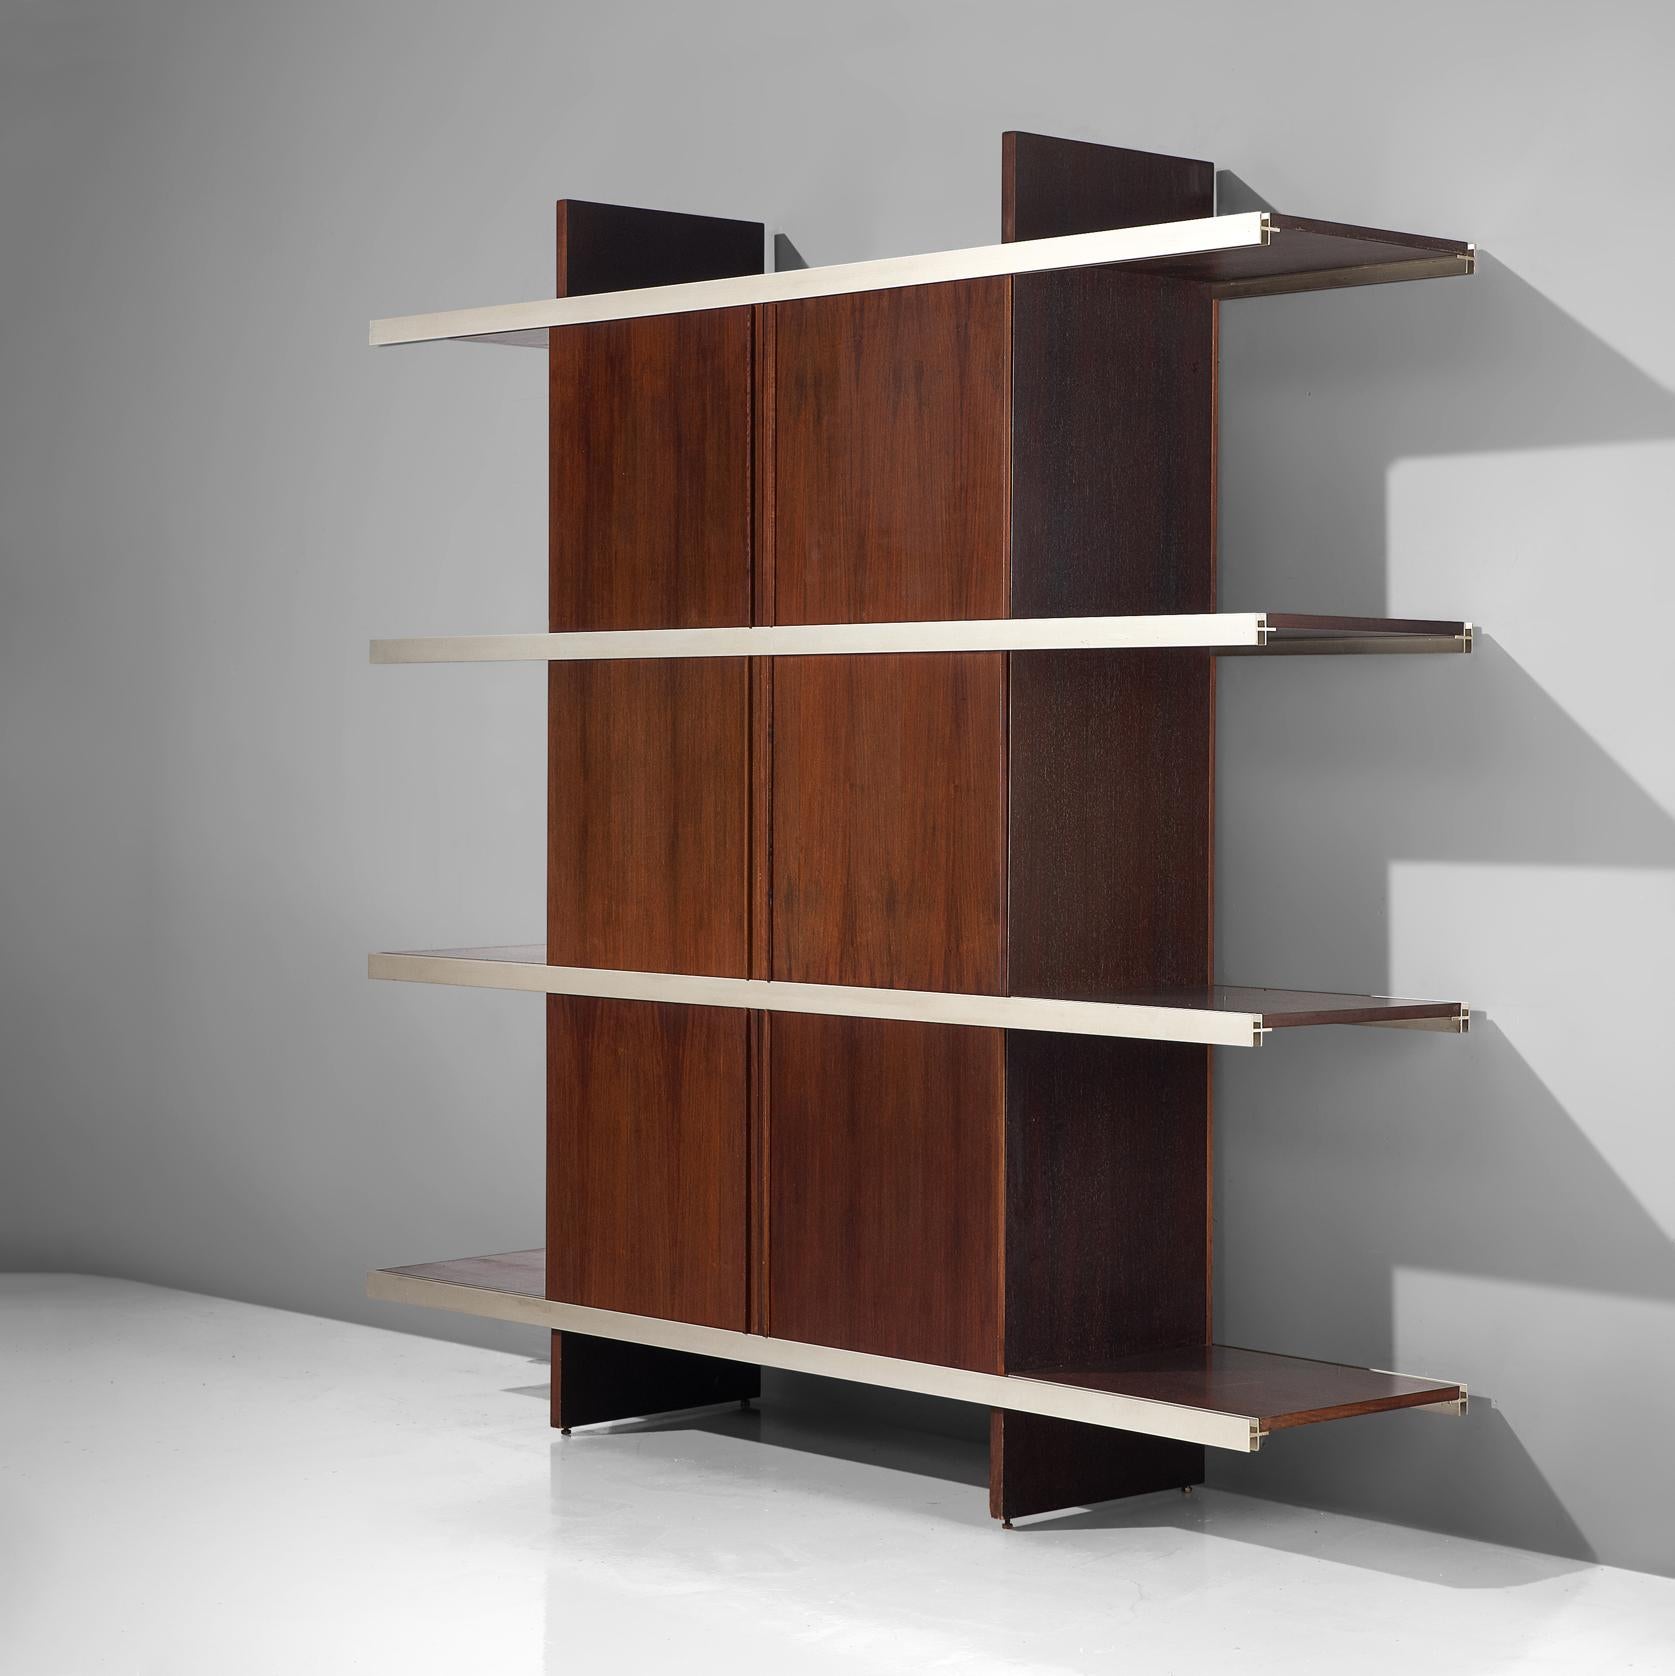 Angelo Mangiarotti for Poltronova, cabinet/bookcase from the multiuse series, wood, aluminum, Italy, 1960s.

Beautiful bookcase or sideboard of the multiuse series that Mangiarotti designed for Poltronova. The line stands for versatile pieces of